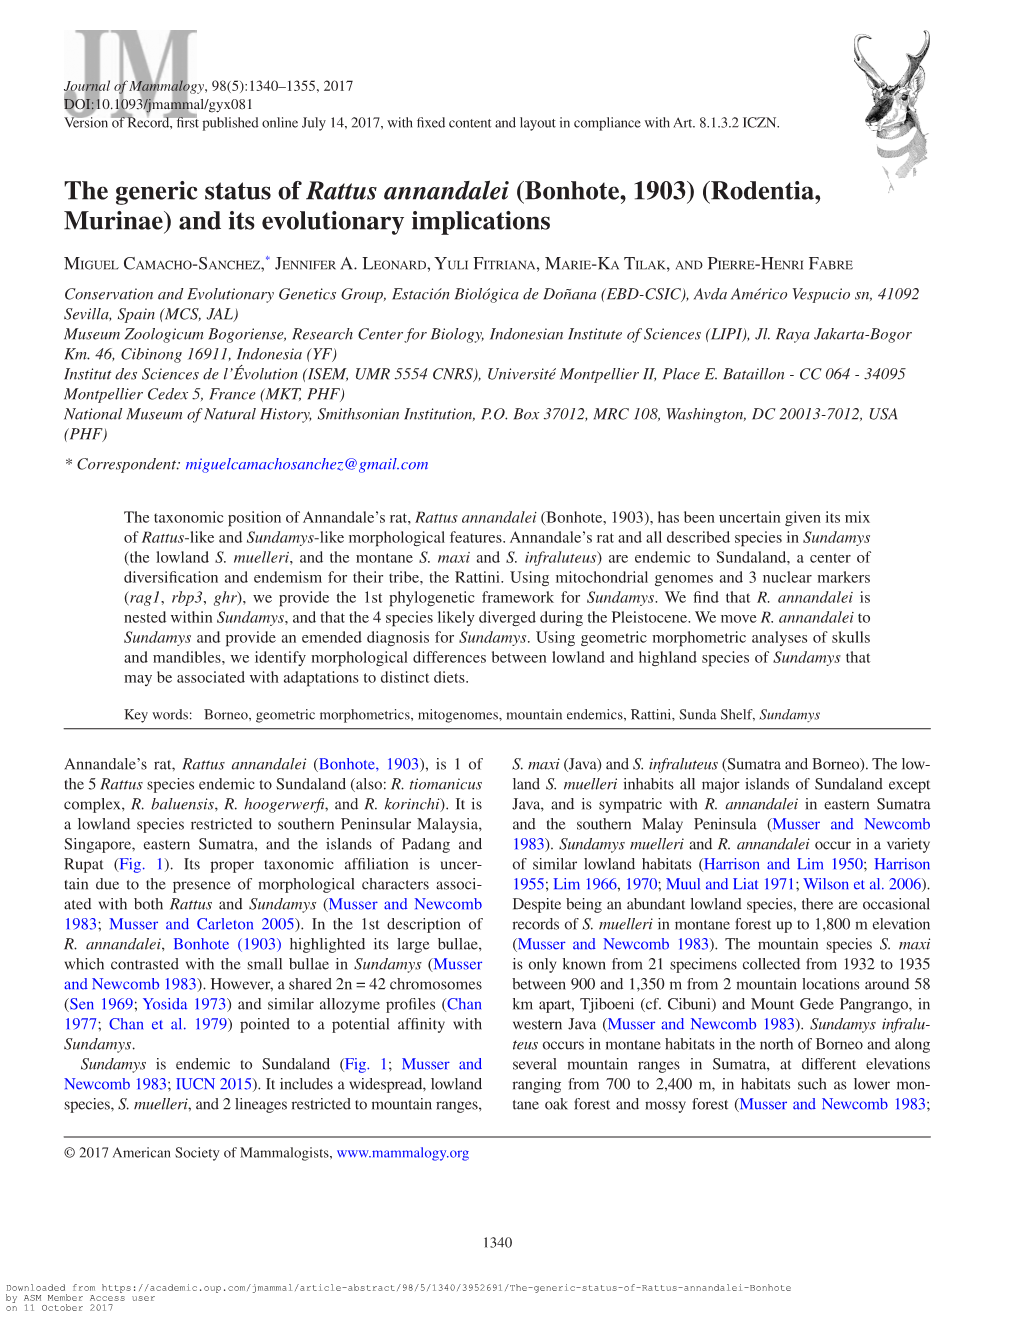 The Generic Status of Rattus Annandalei (Bonhote, 1903) (Rodentia, Murinae) and Its Evolutionary Implications